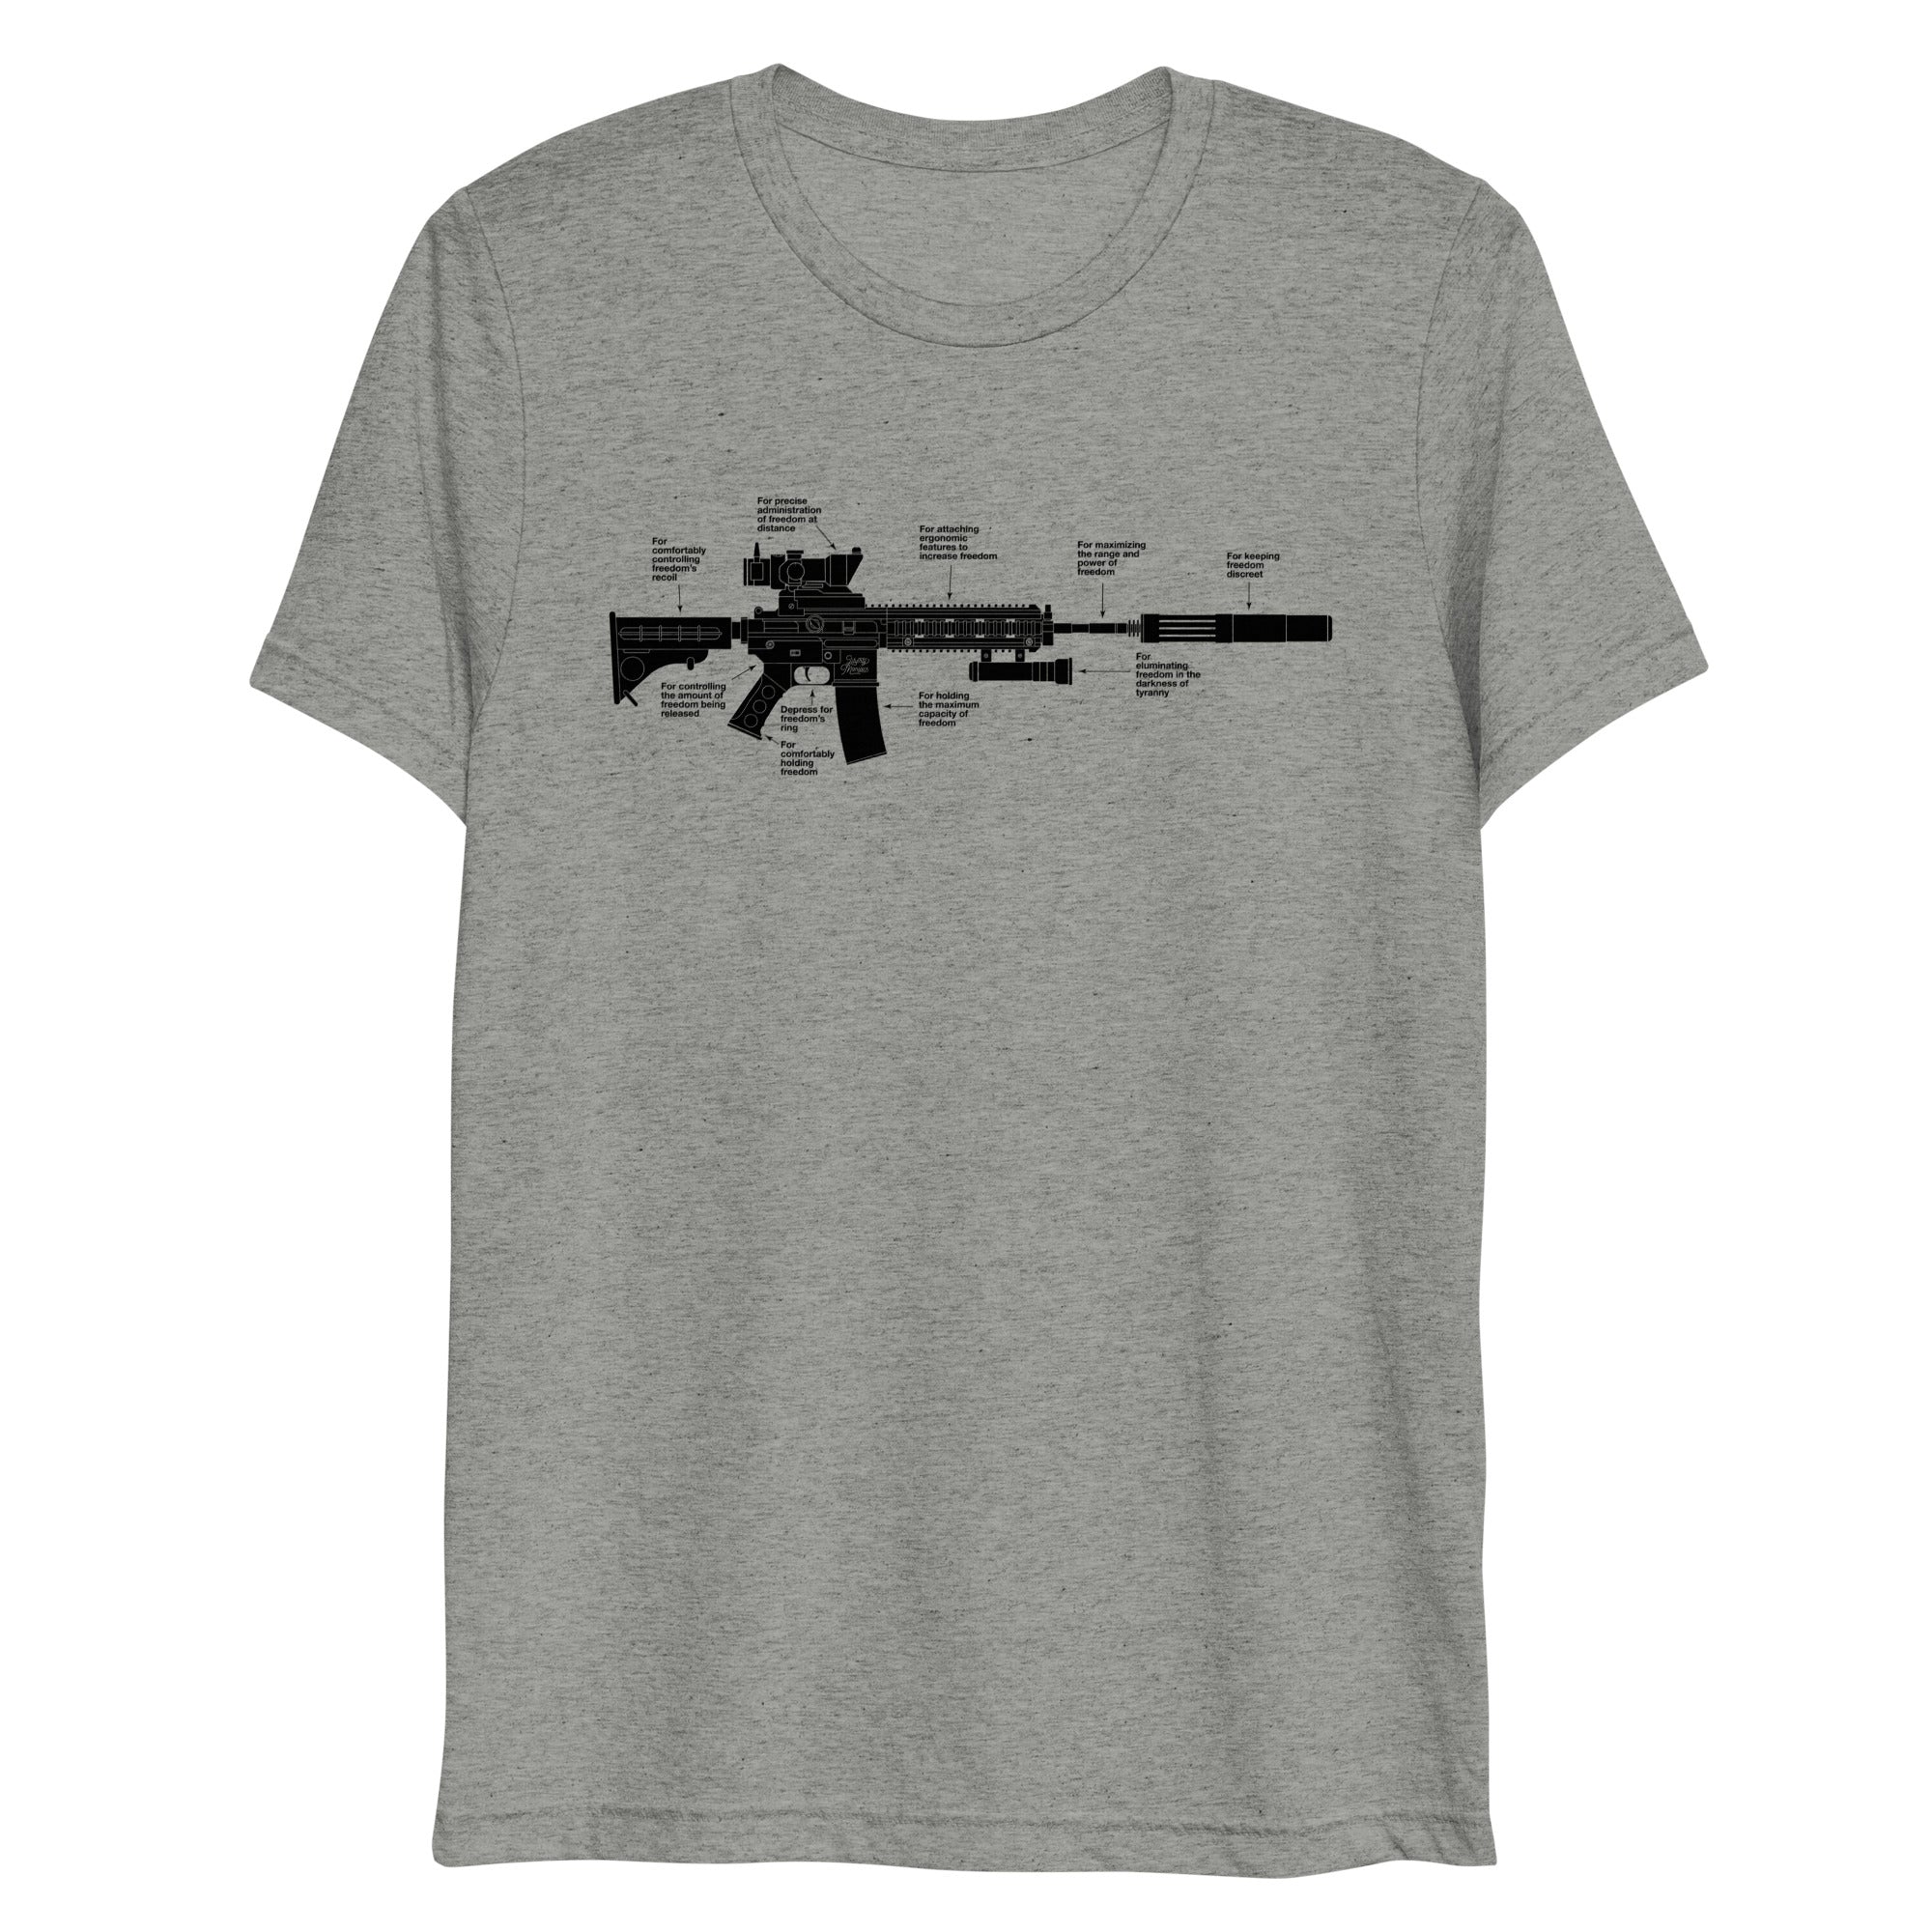 Components of Freedom Rifle Tri-Blend Shirt